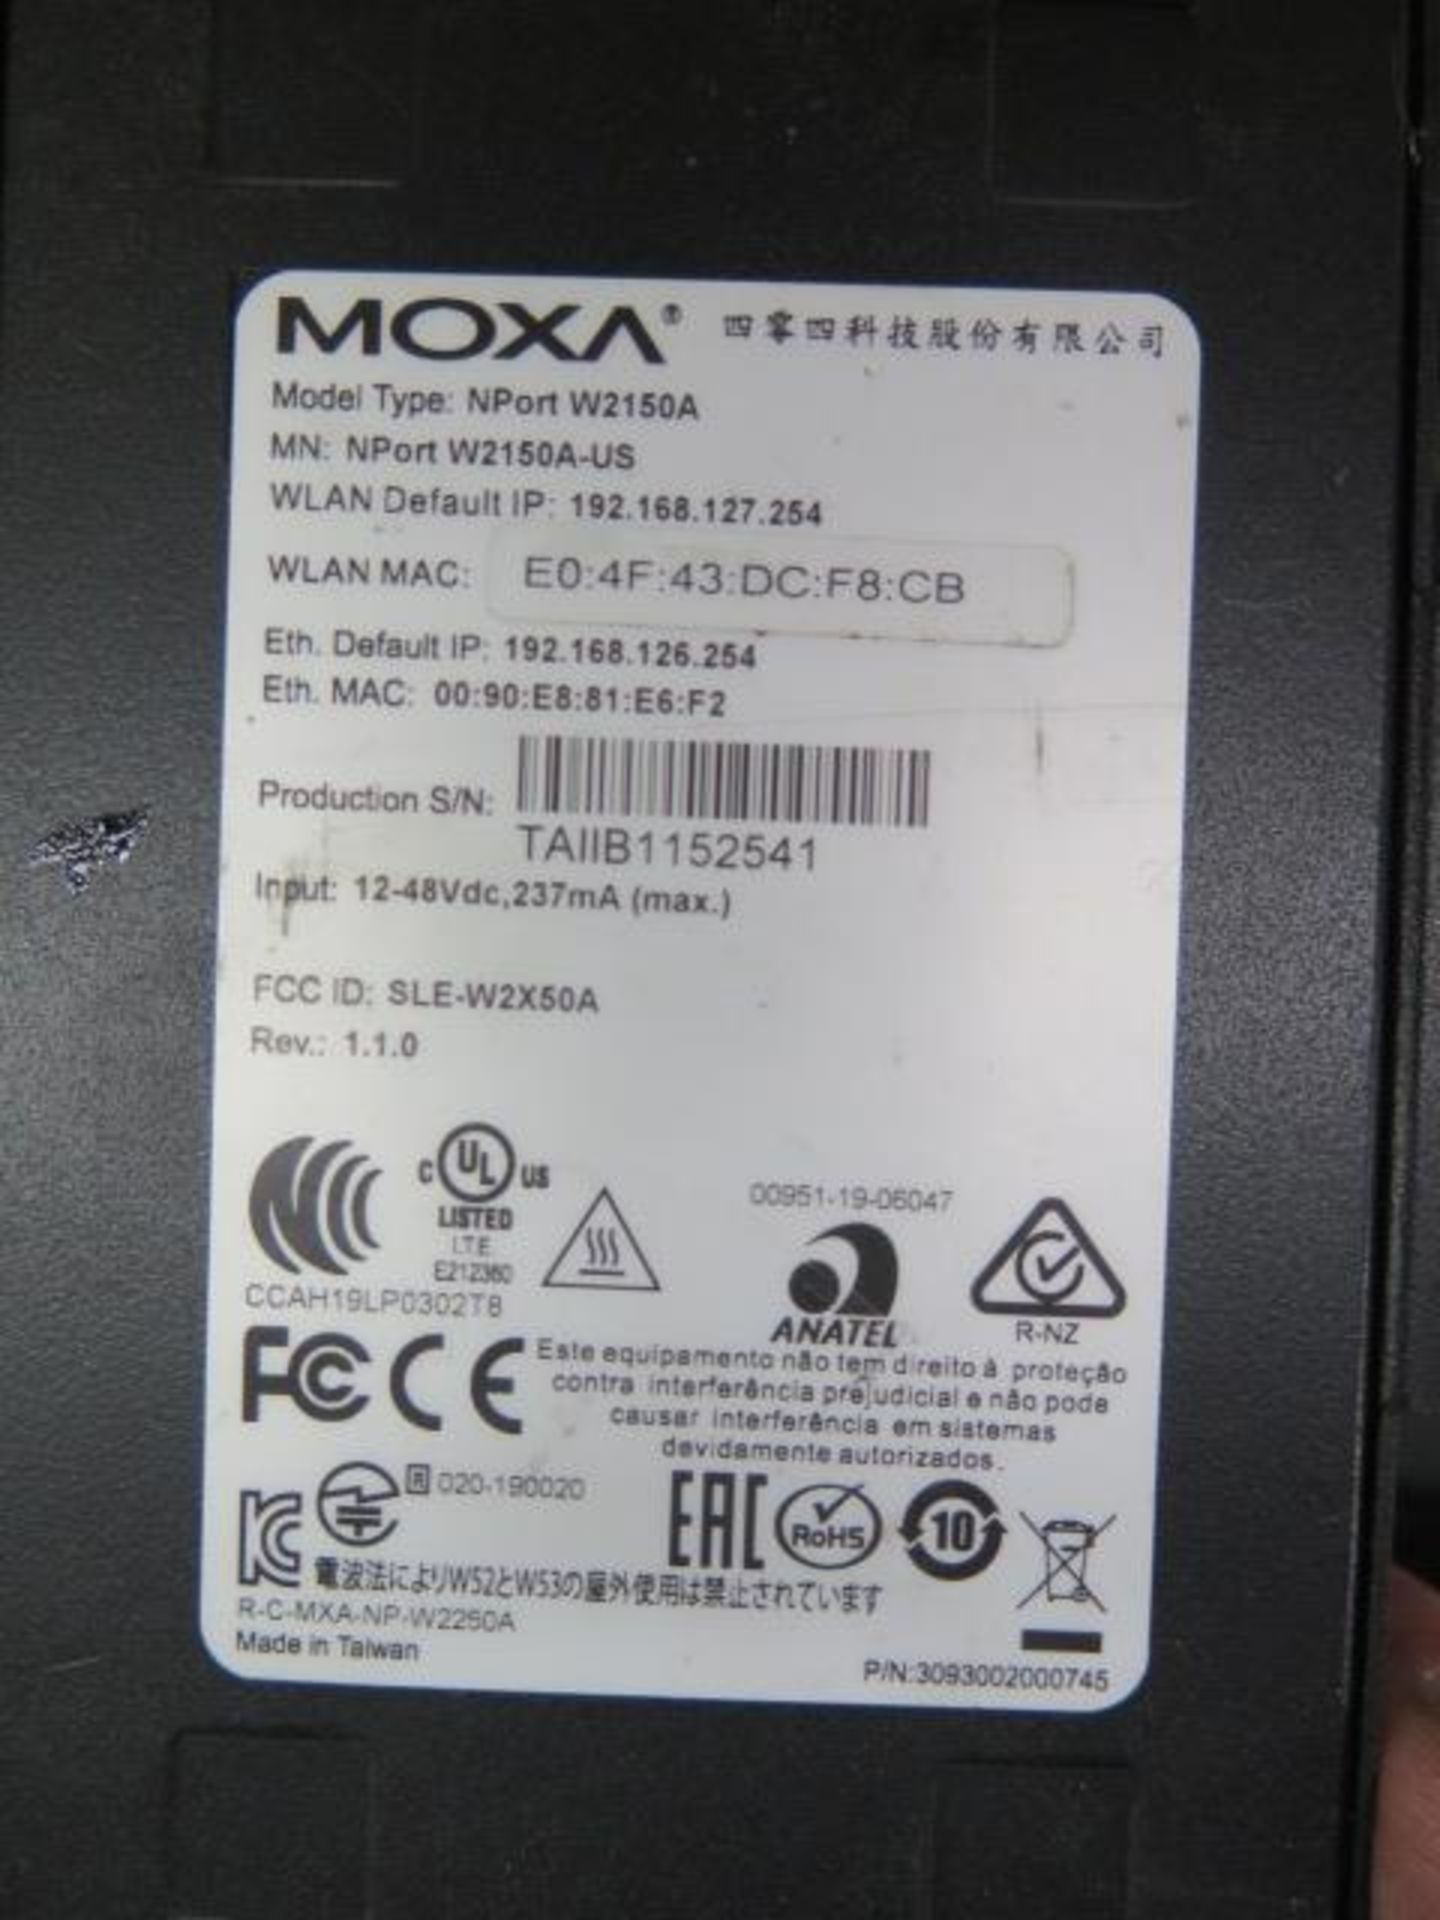 Shop Floor Automations / MOXA mdl. Nport W2150A "Wireless Connects" Wireless Serial Device - Image 4 of 8